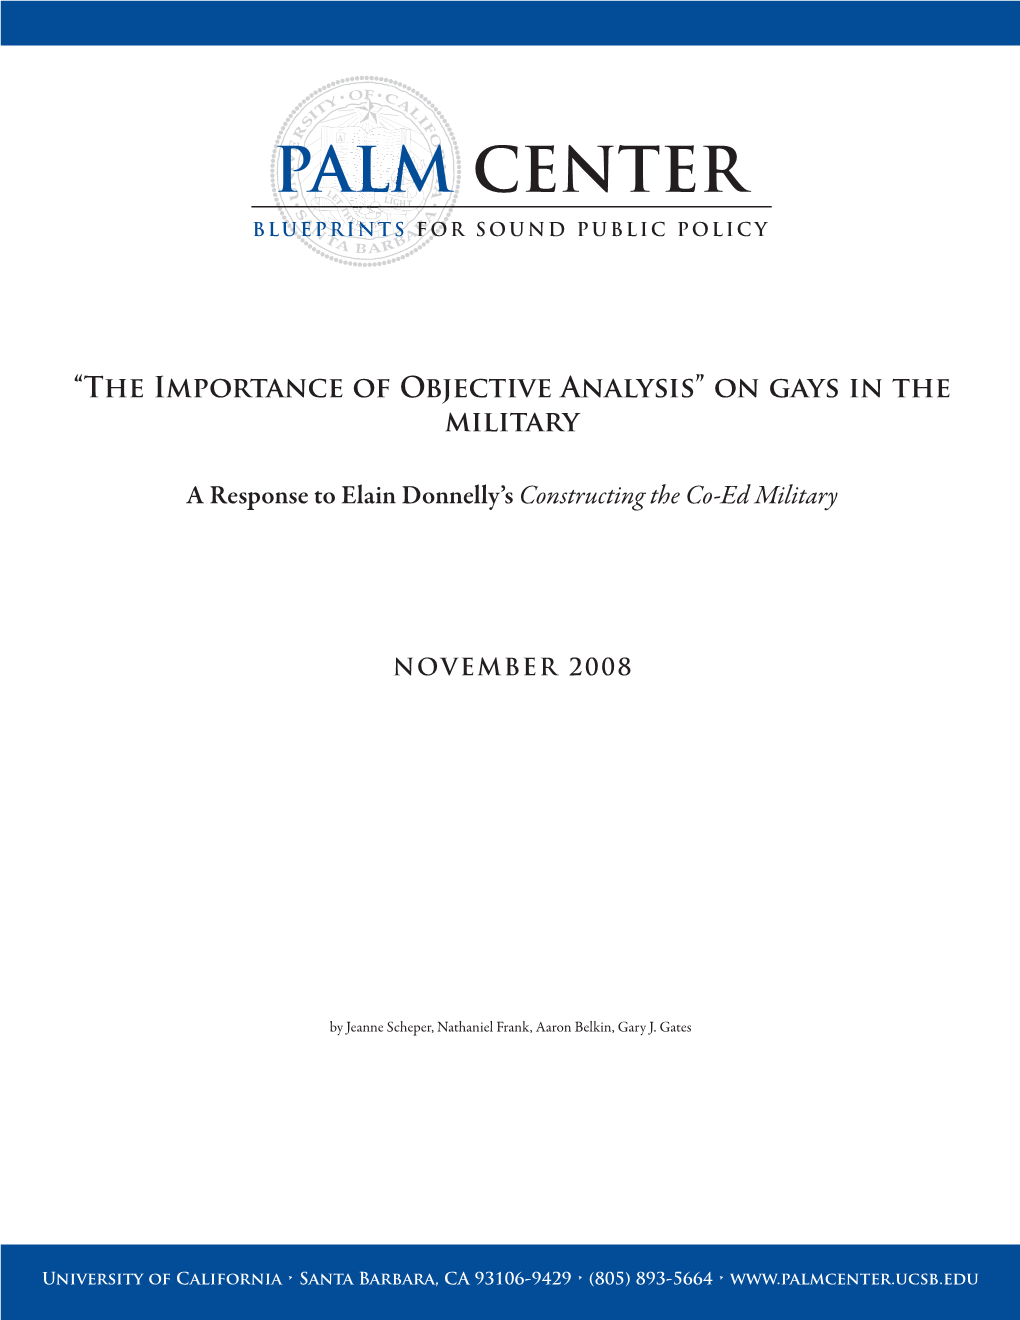 “The Importance of Objective Analysis” on Gays in the Military